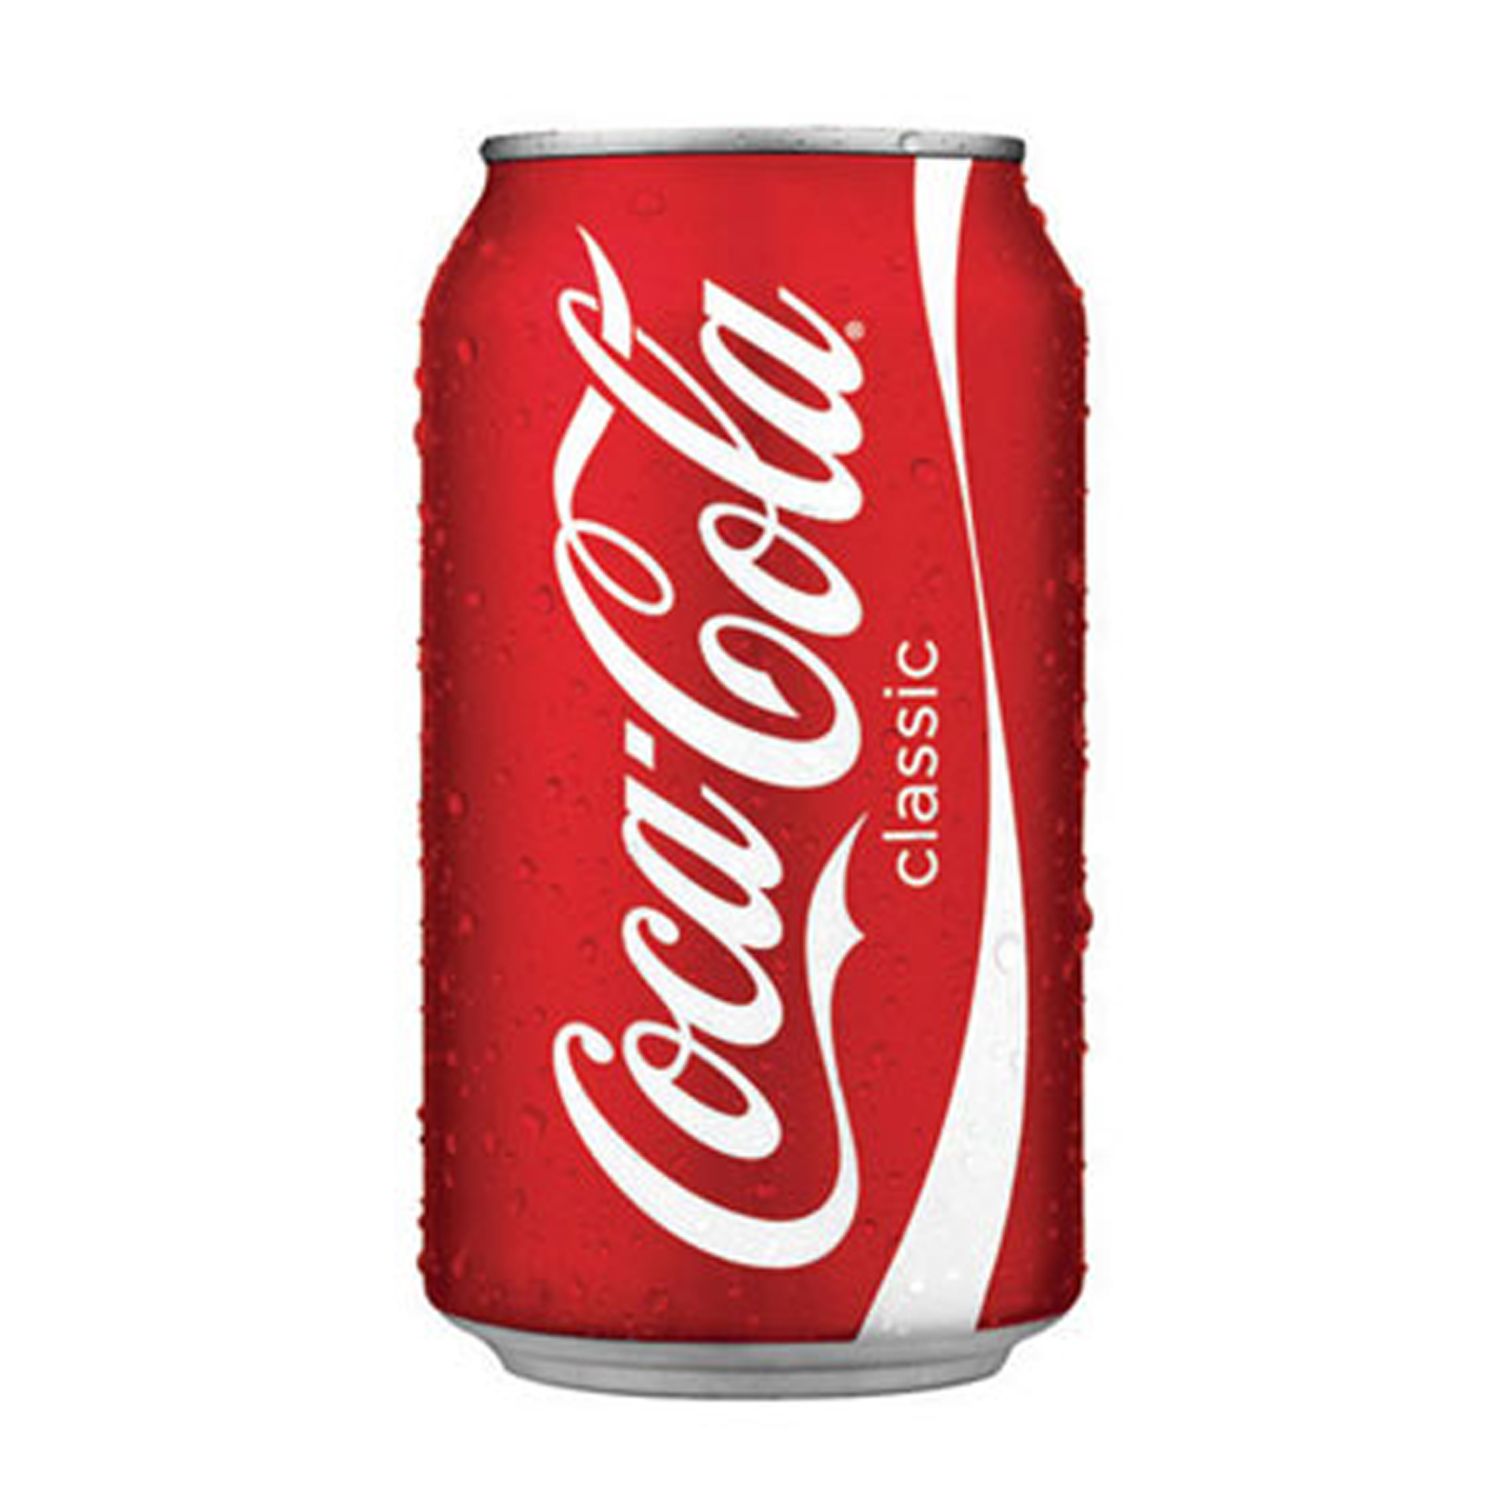 Soda can clip art viewing free clipart images image #18856